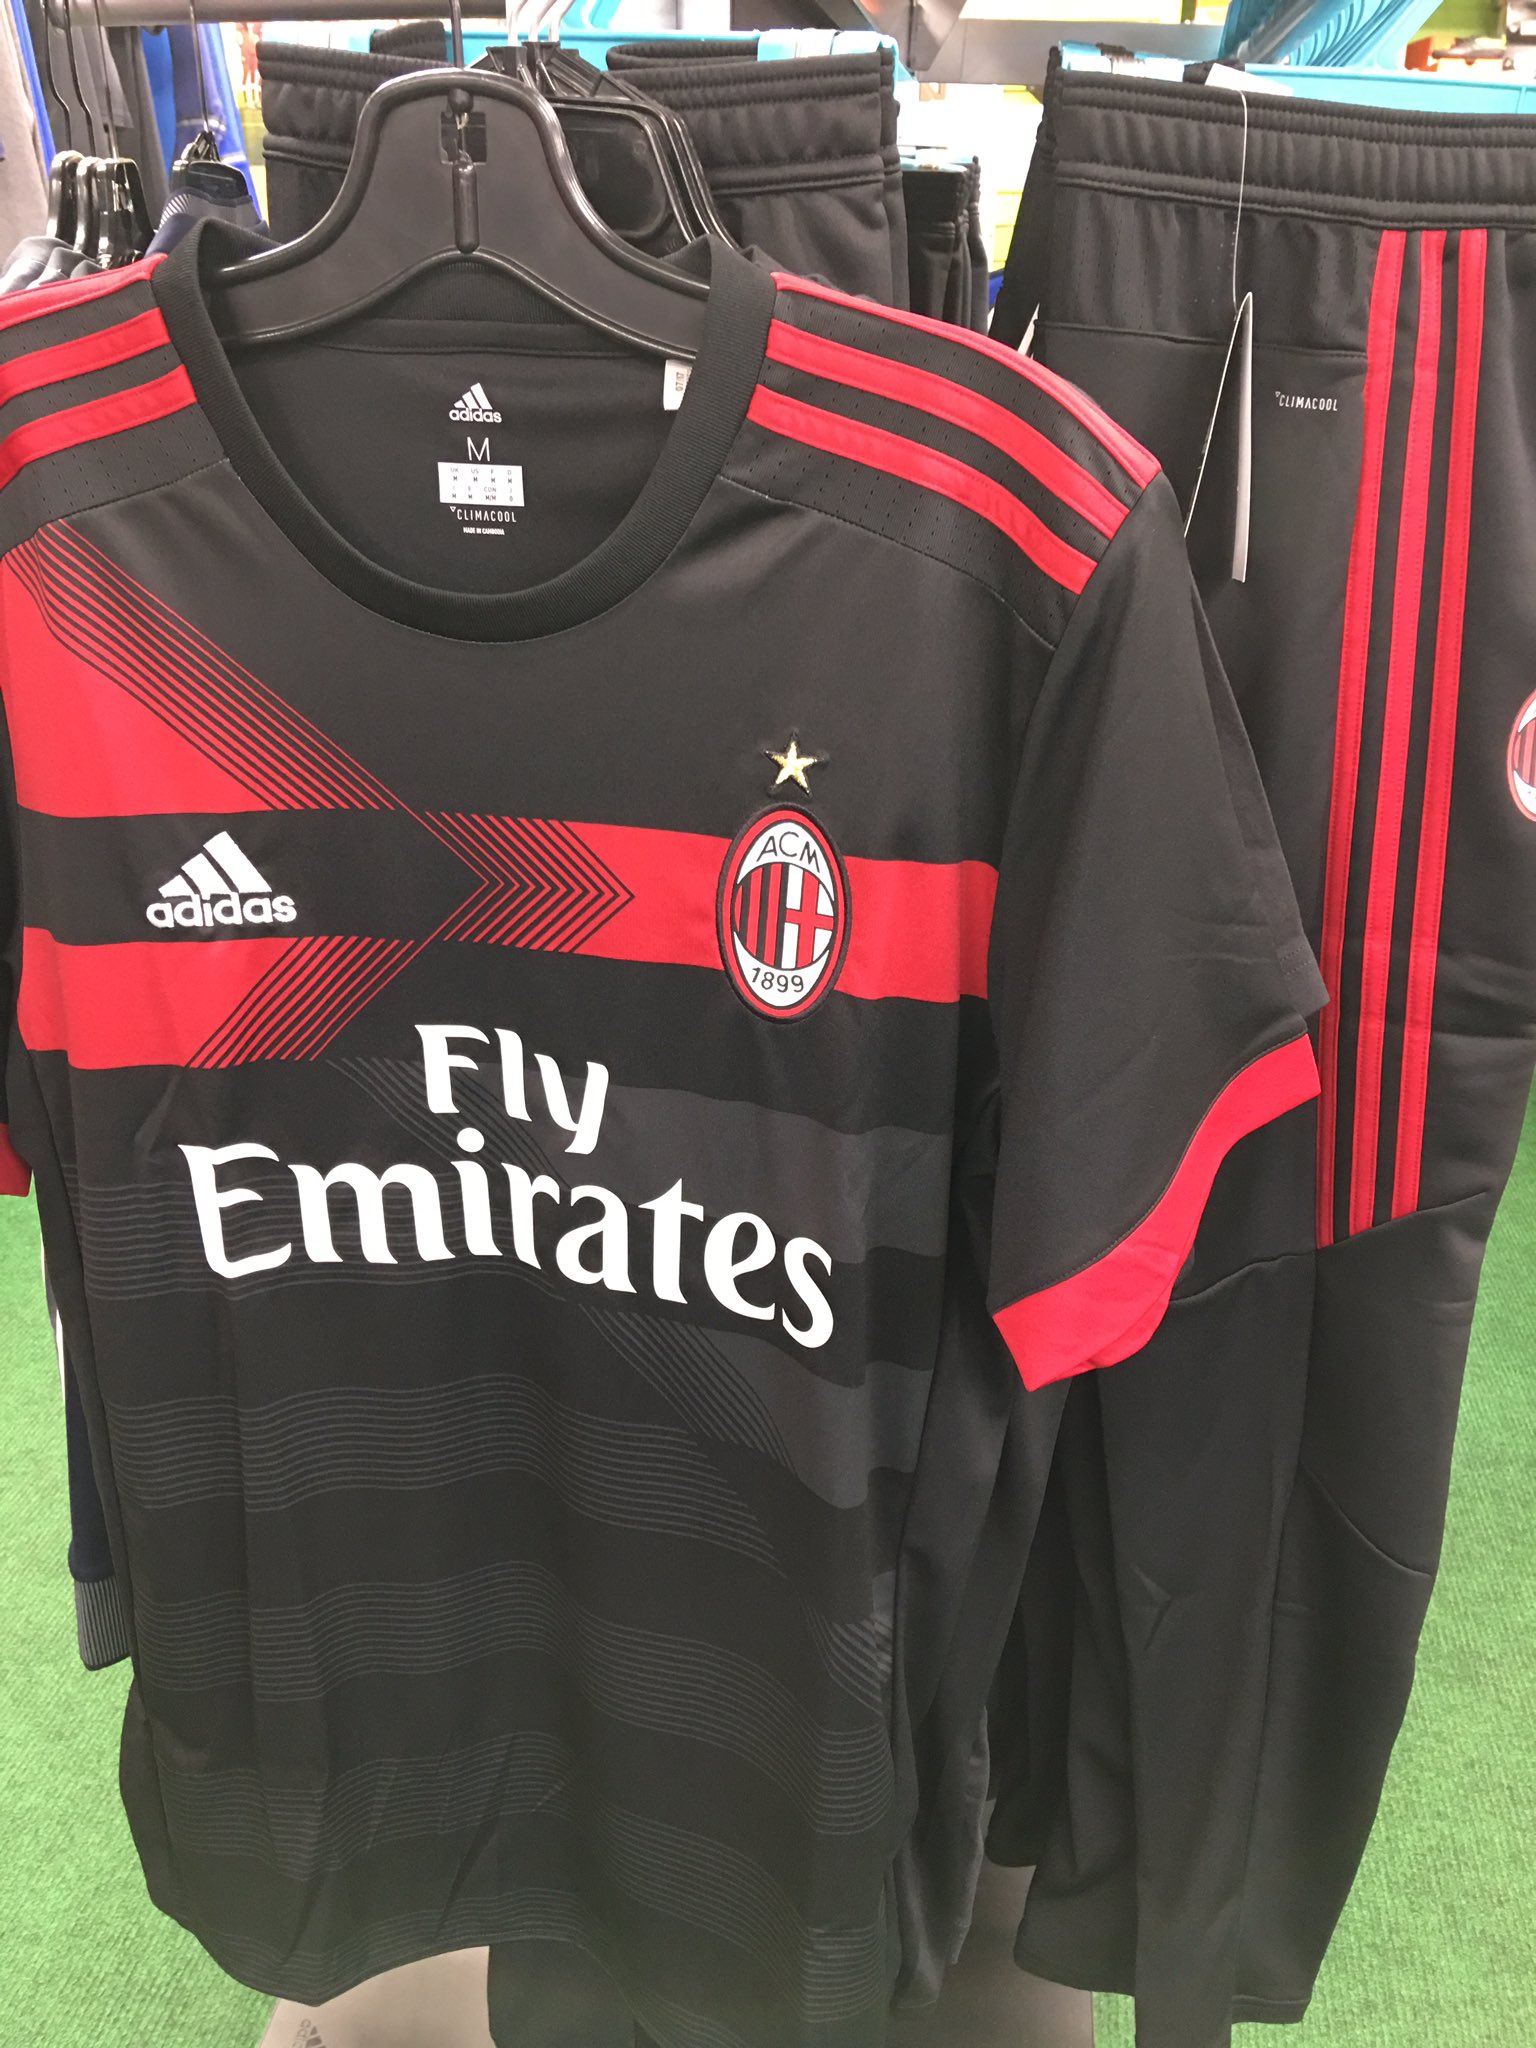 North America Sports on Twitter: "New Ac Milan Third Jersey 2017/18 by Adidas Latest Arrival at #Vancouver Soccer North America Sports # acmilan #milan #adidas https://t.co/SfmKOxboH7" / Twitter